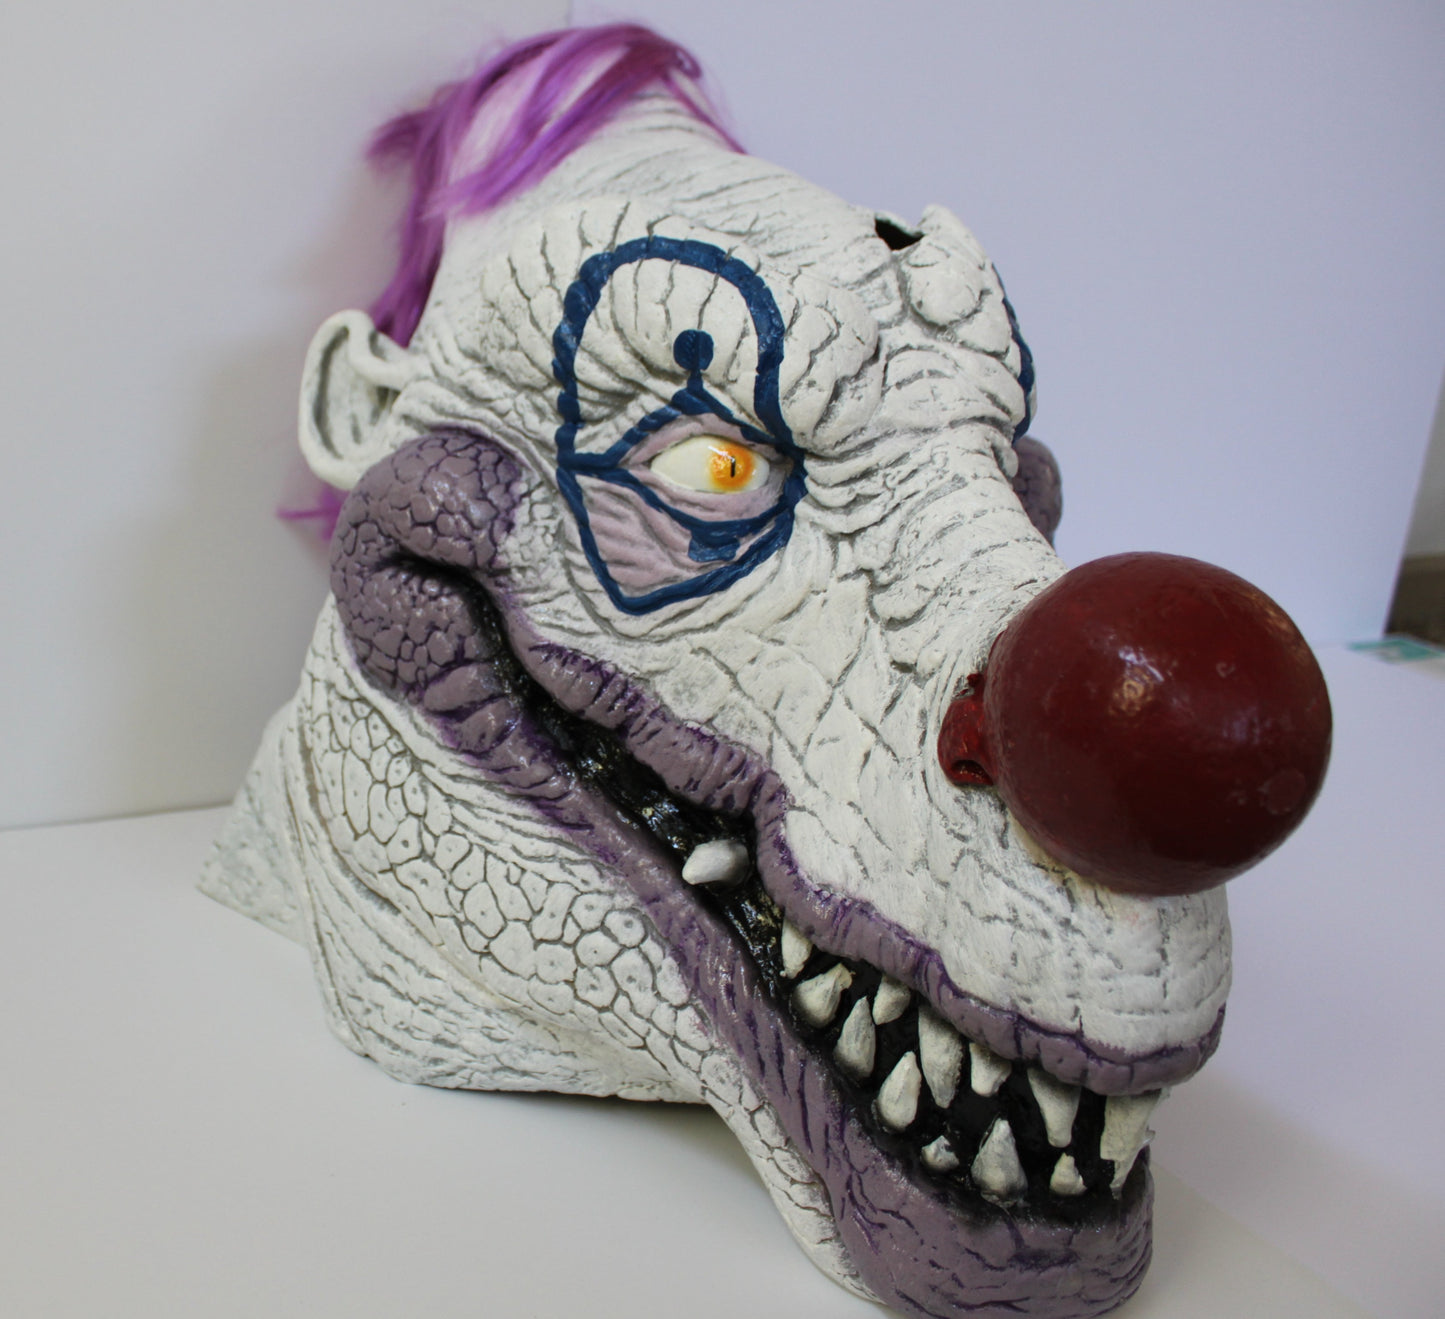 Be The Head Of The Killer Klown Team With Your Klownzilla Mask